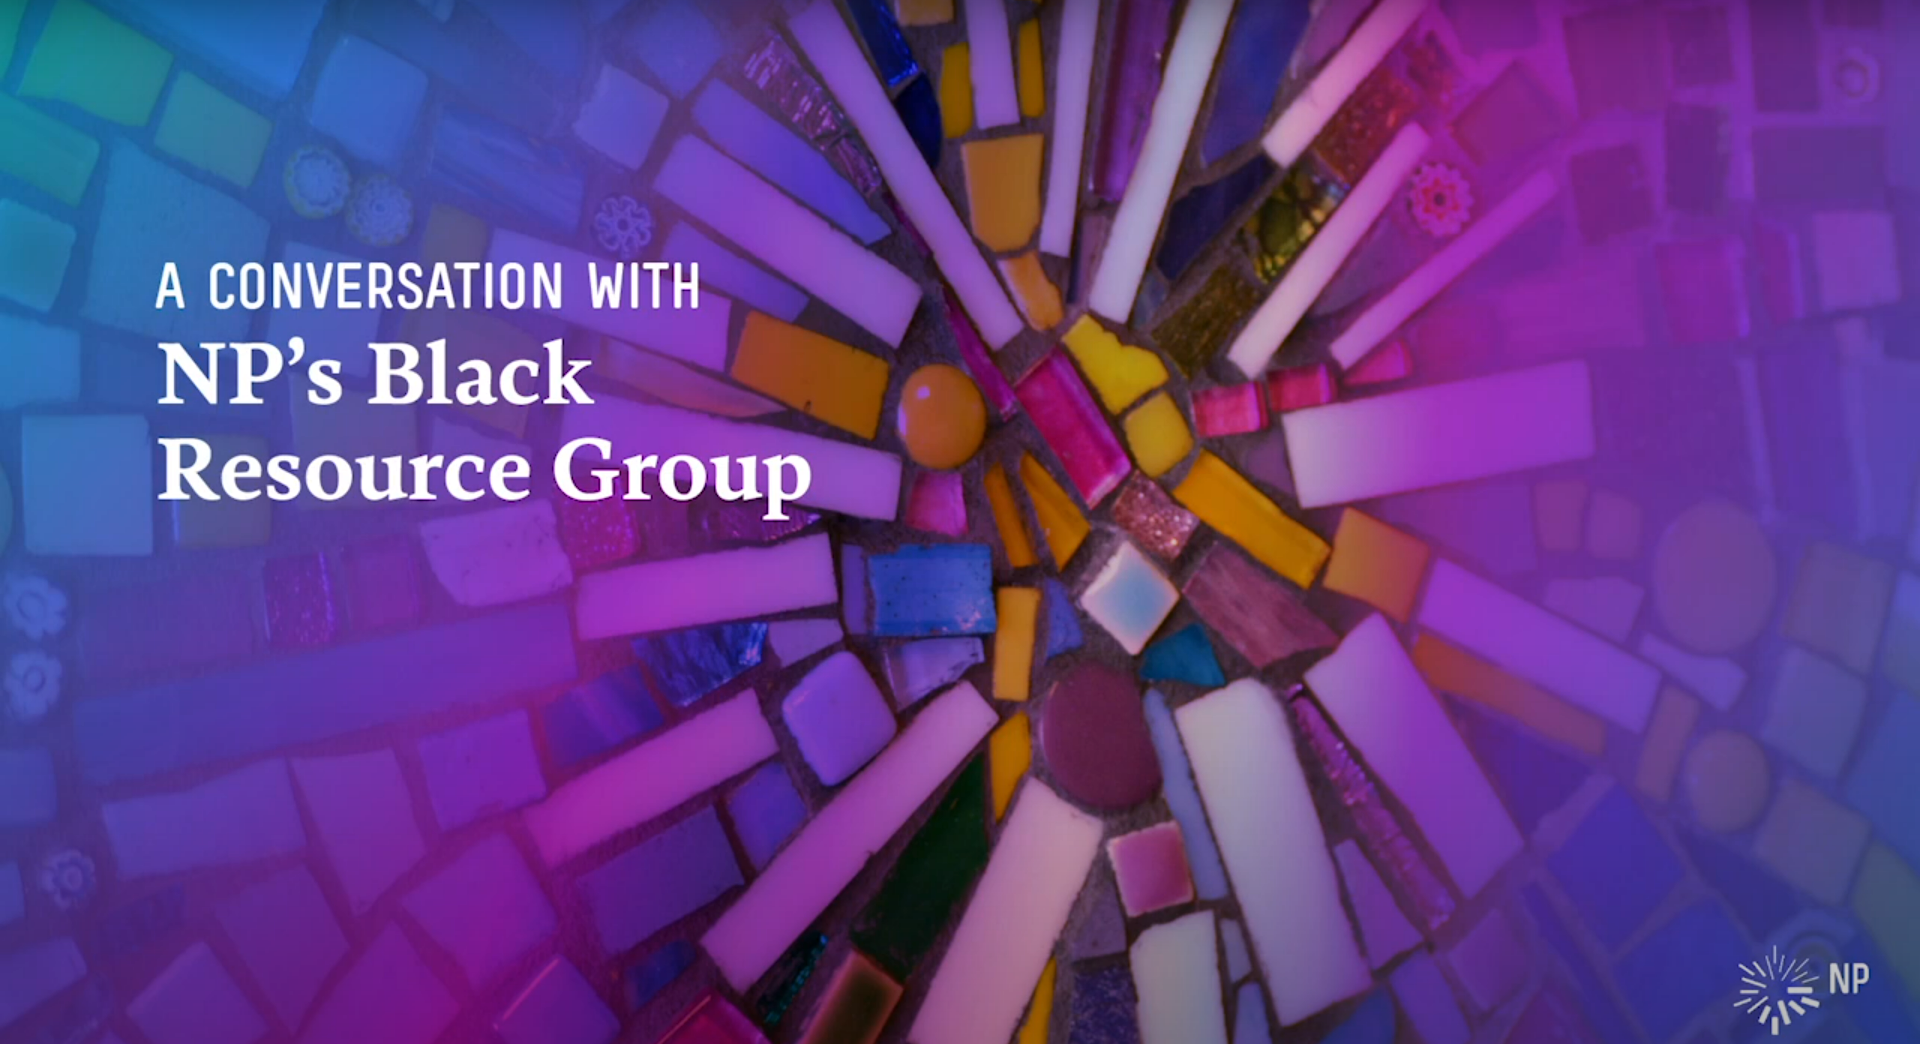 A conversation with NP's Black Resource Group